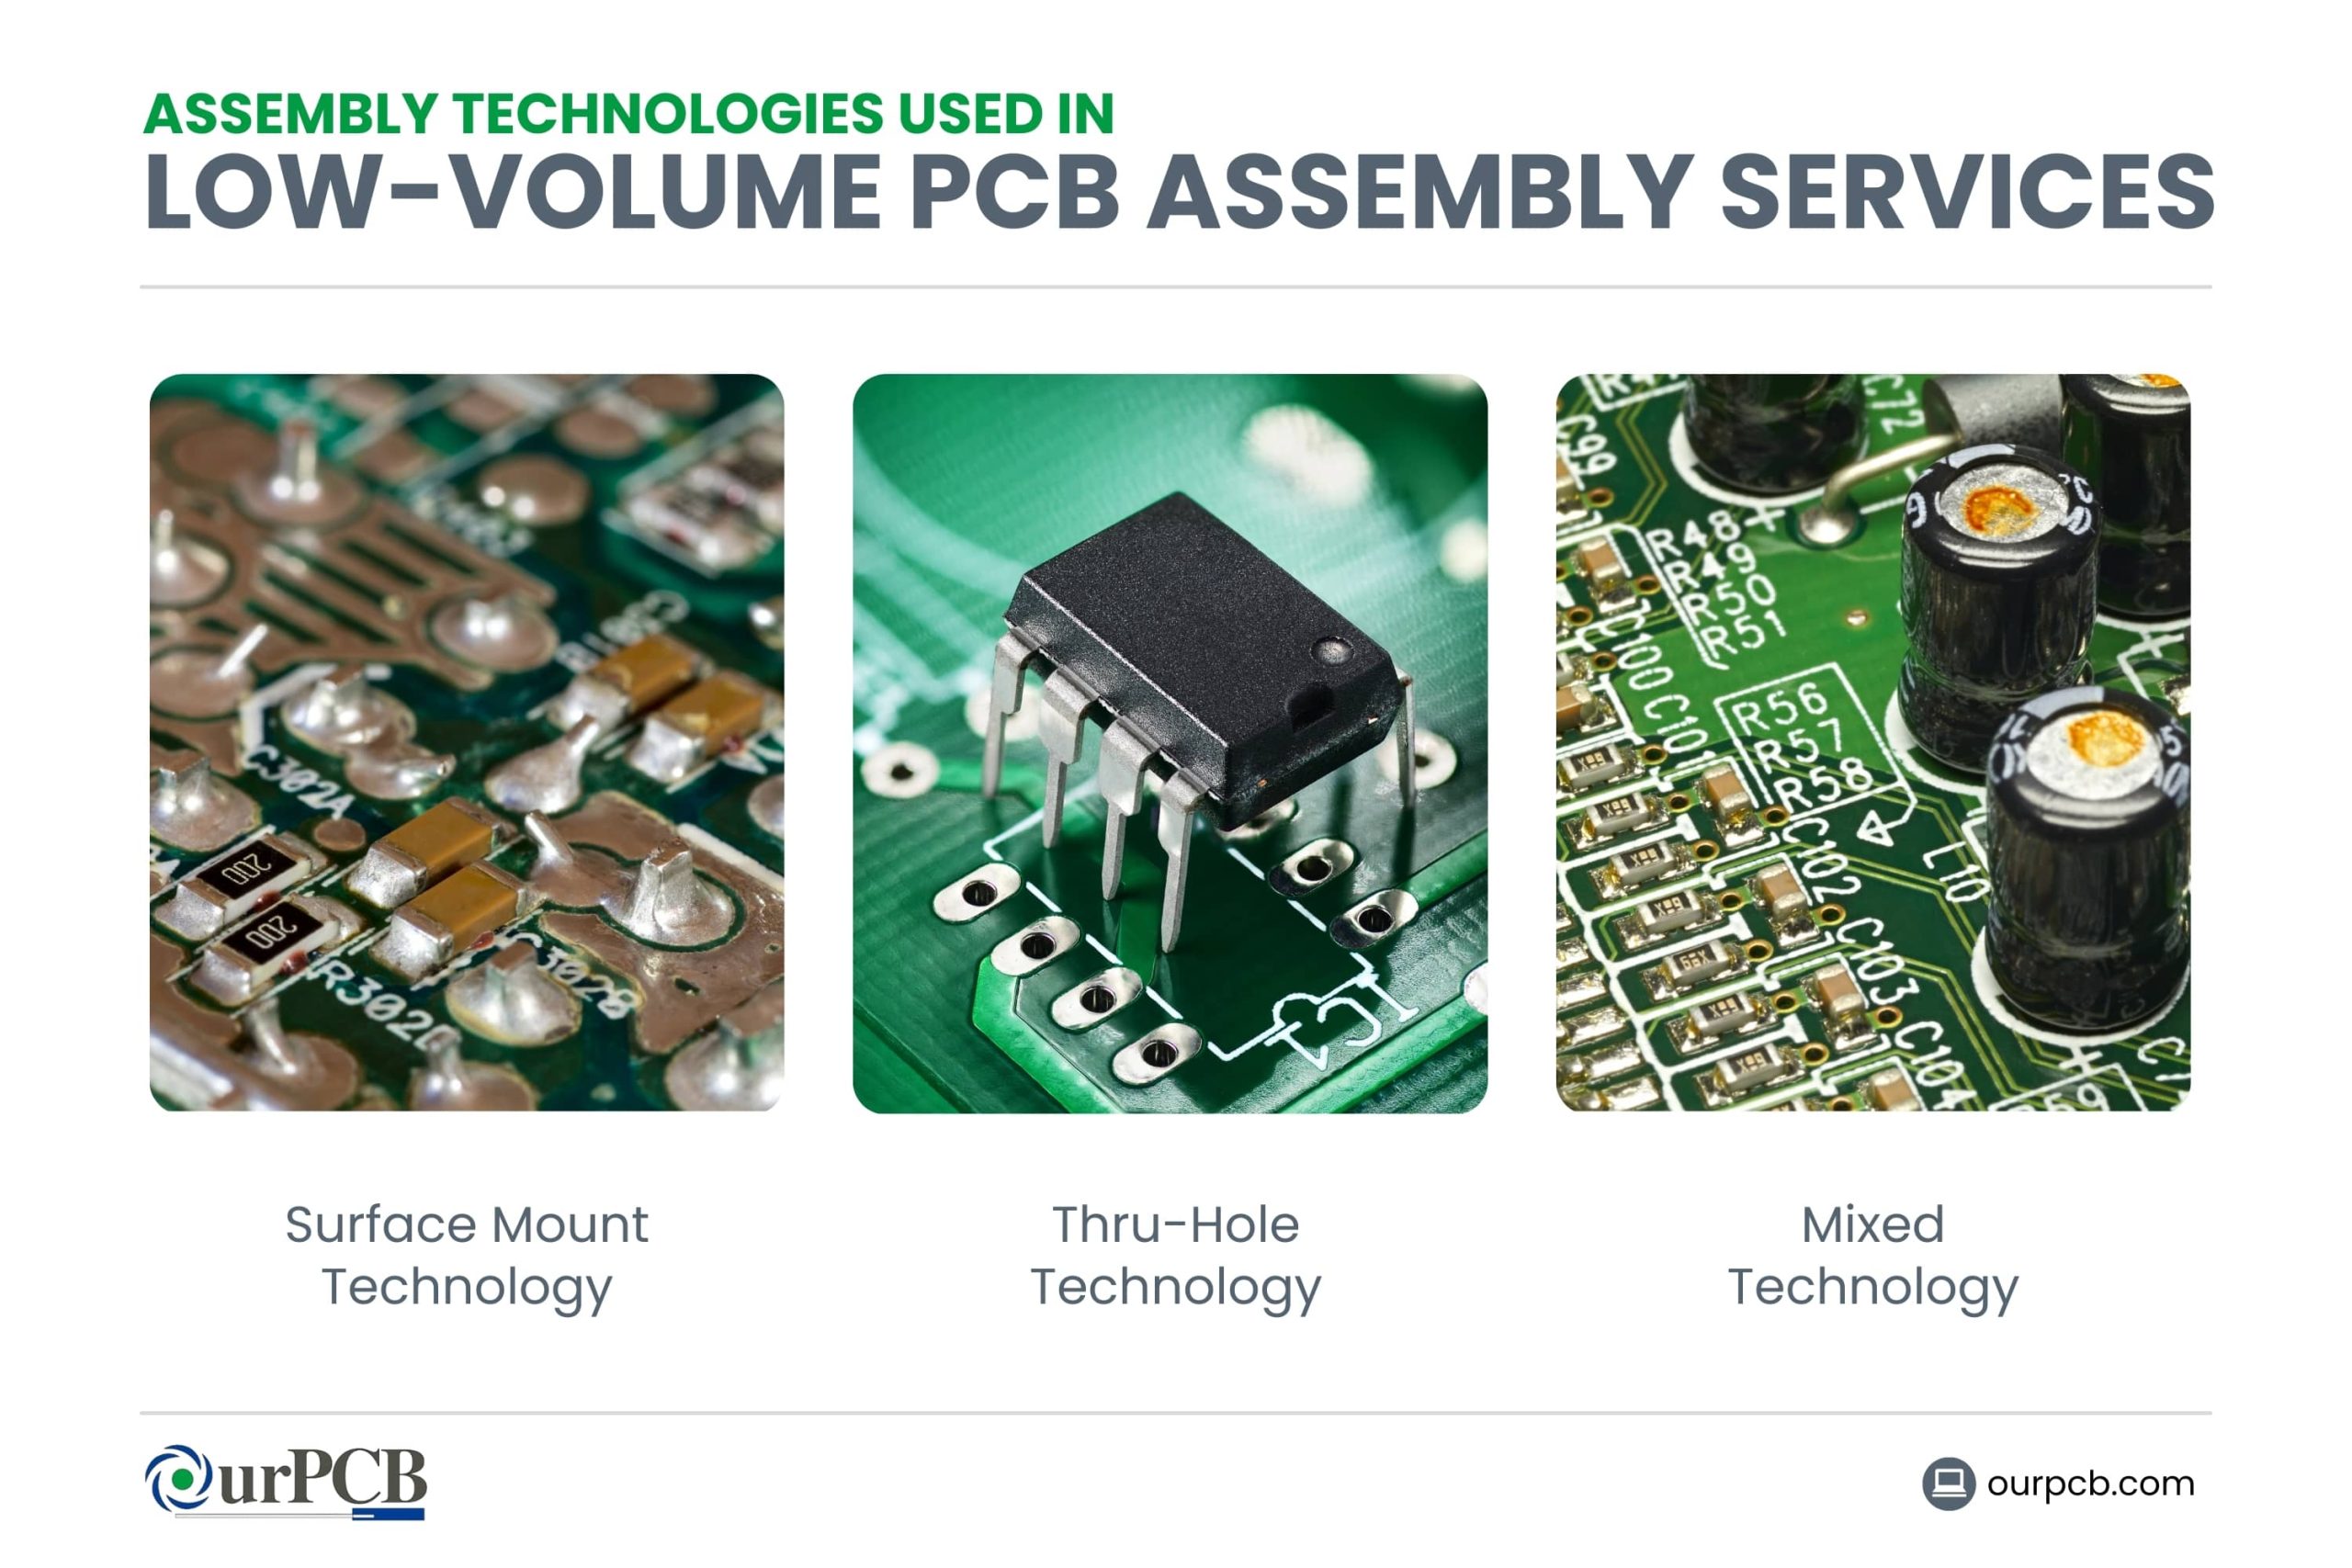 Assembly Technologies Used in Low-Volume PCB Assembly Services